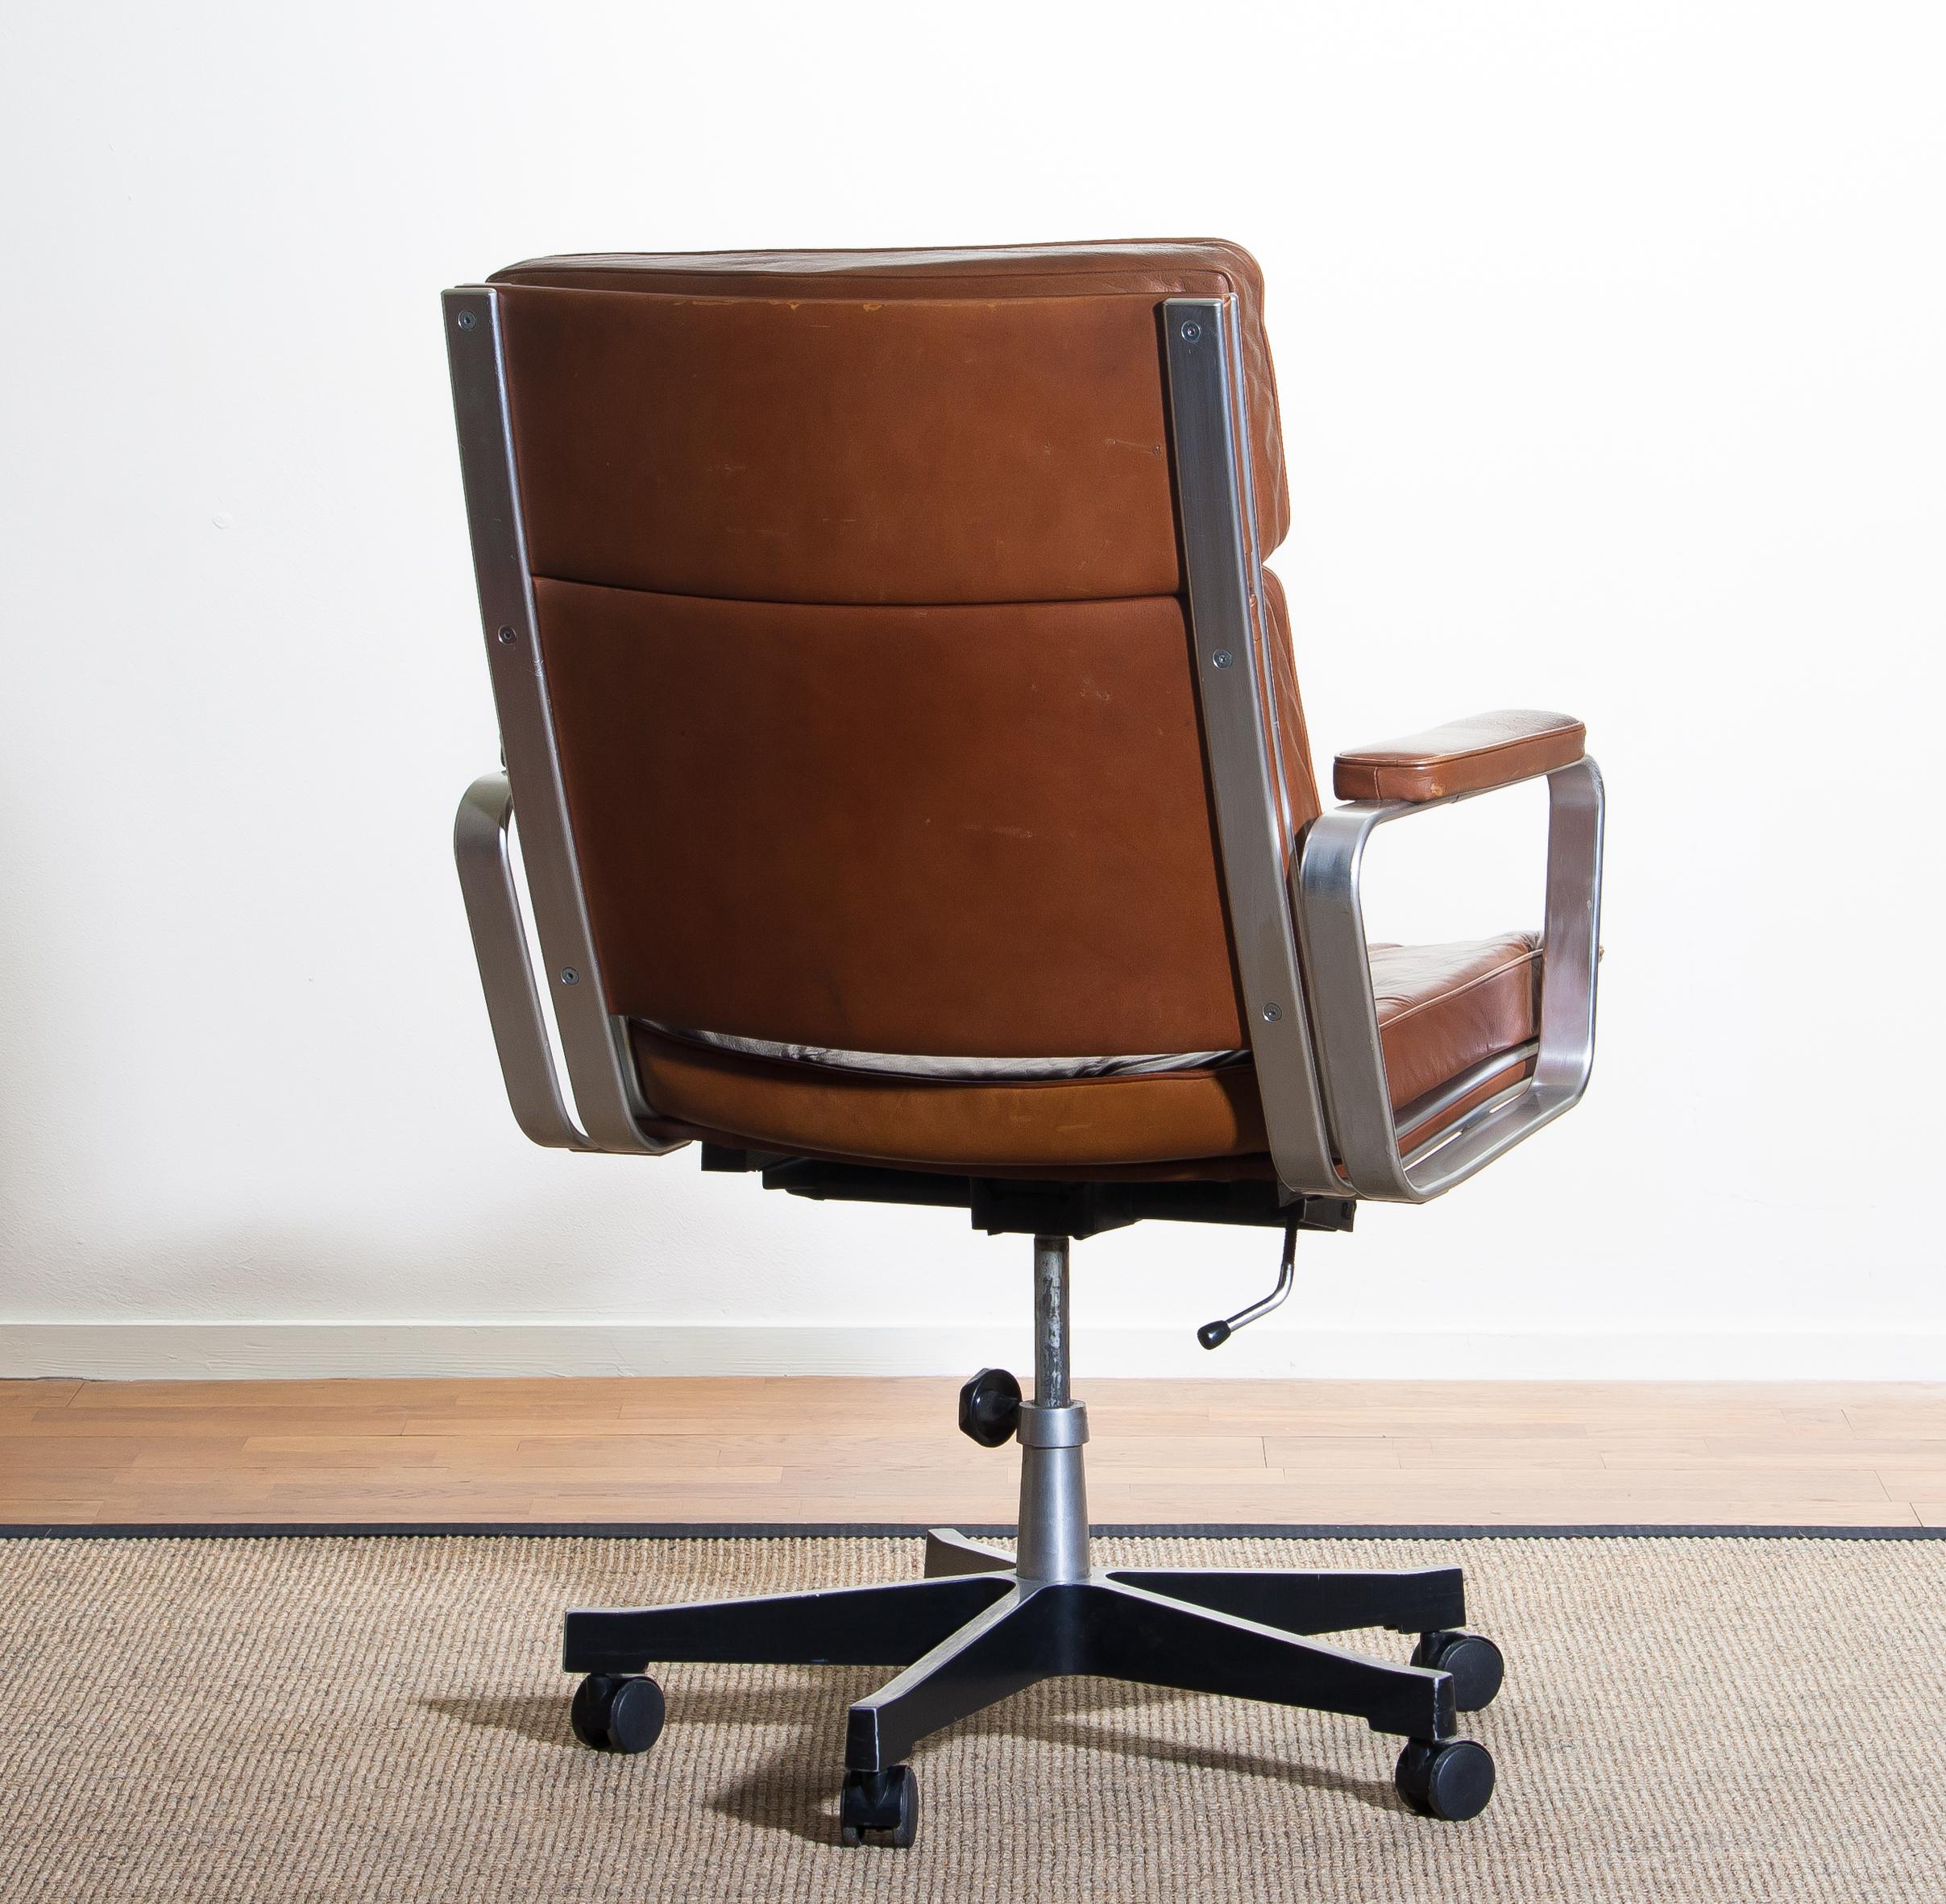 1970s, Brown Leather and Aluminum Desk Chair by Karl Erik Ekselius for Joc 5